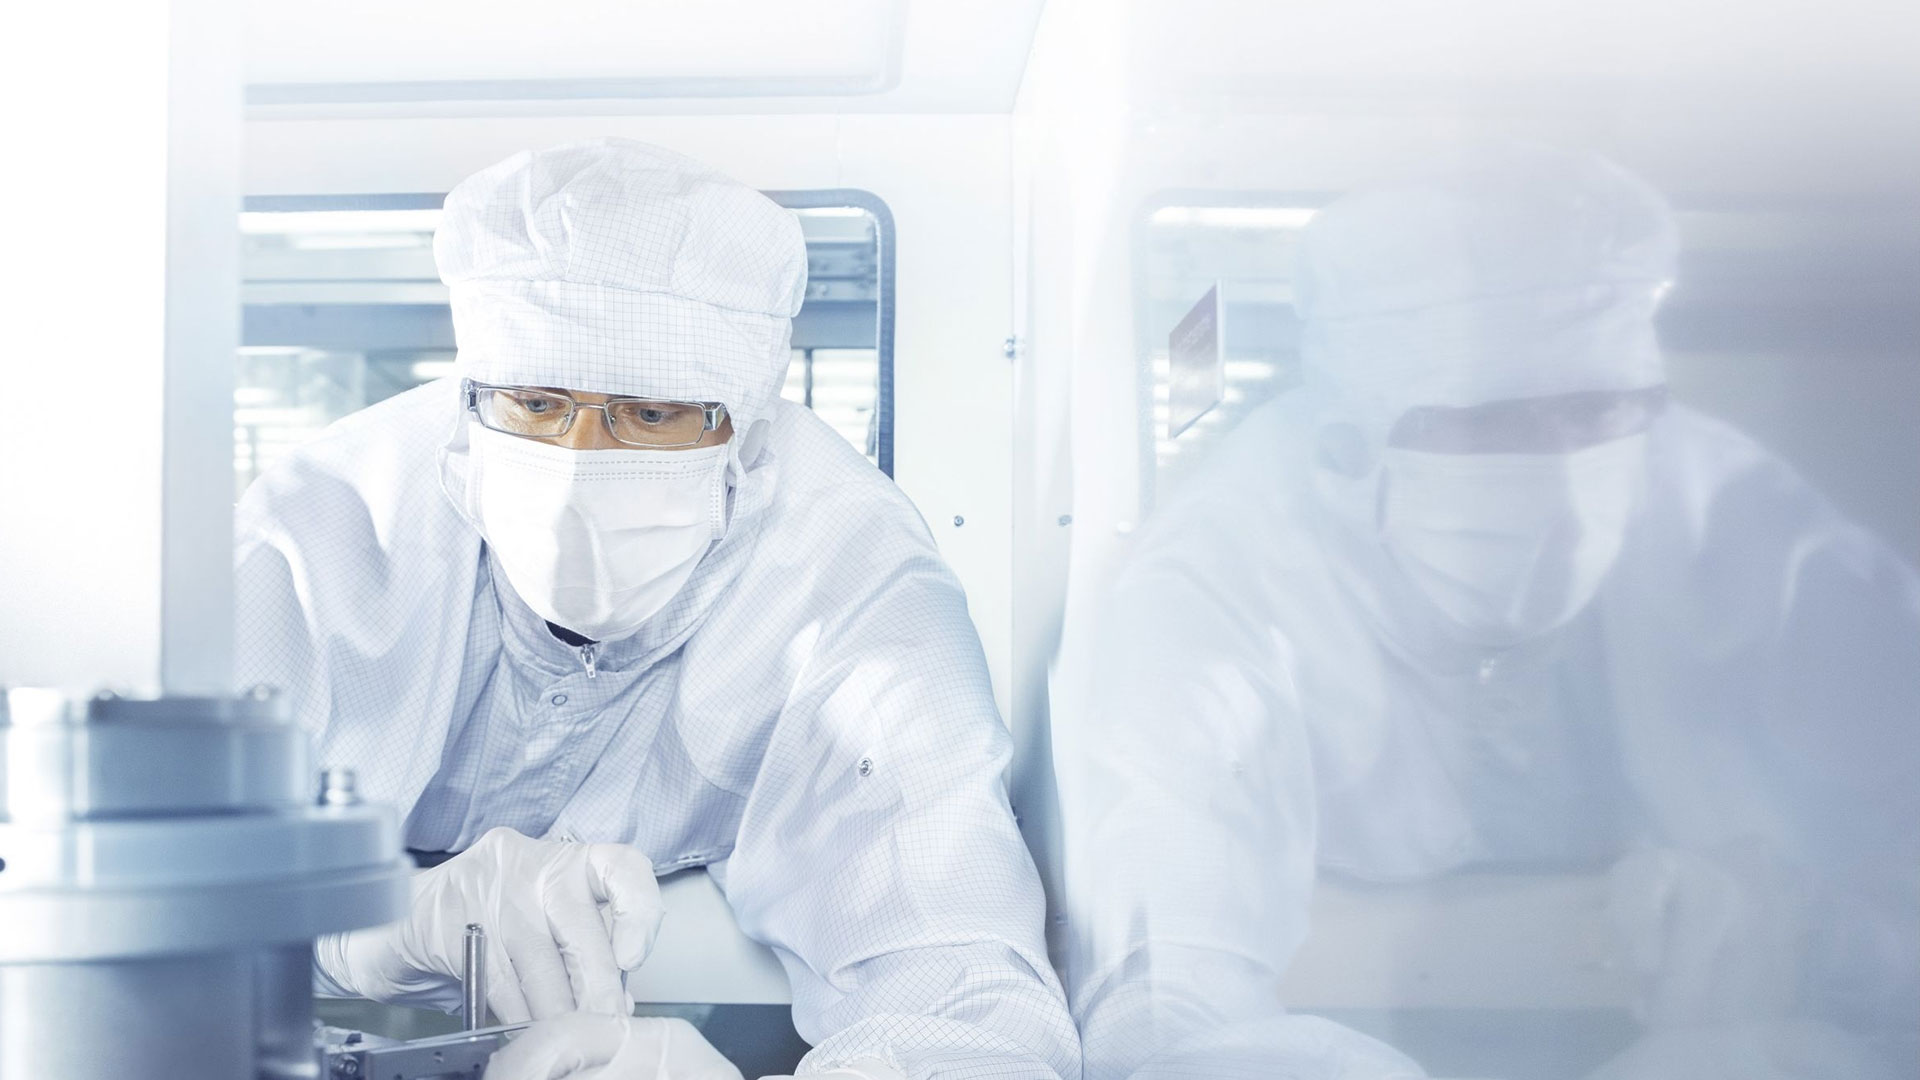 An employee works in the clean room on a tool from ZEISS SMT